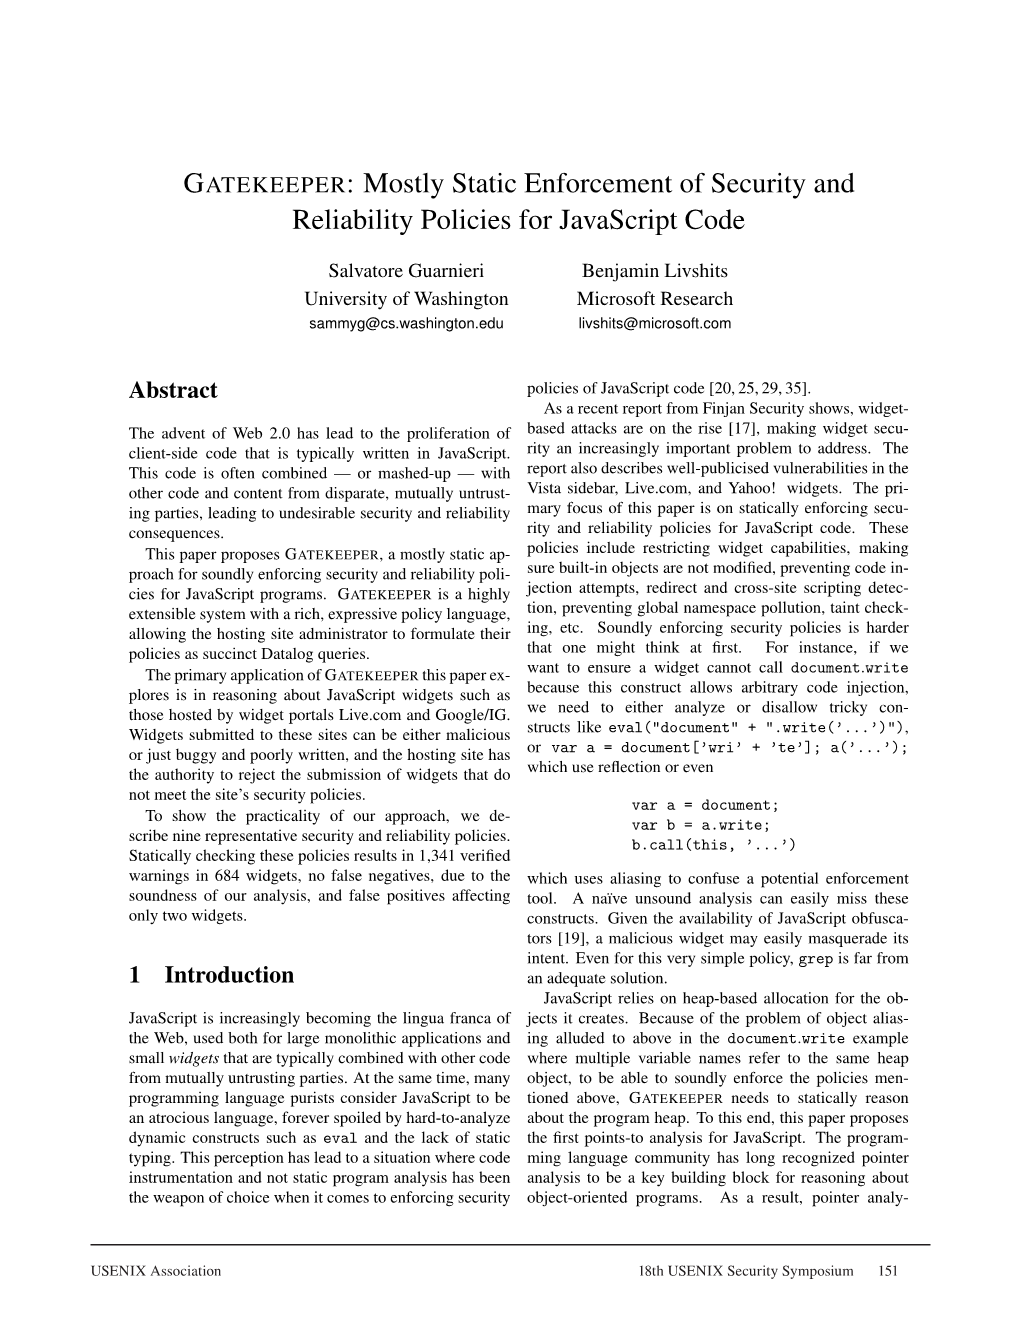 GATEKEEPER: Mostly Static Enforcement of Security and Reliability Policies for Javascript Code